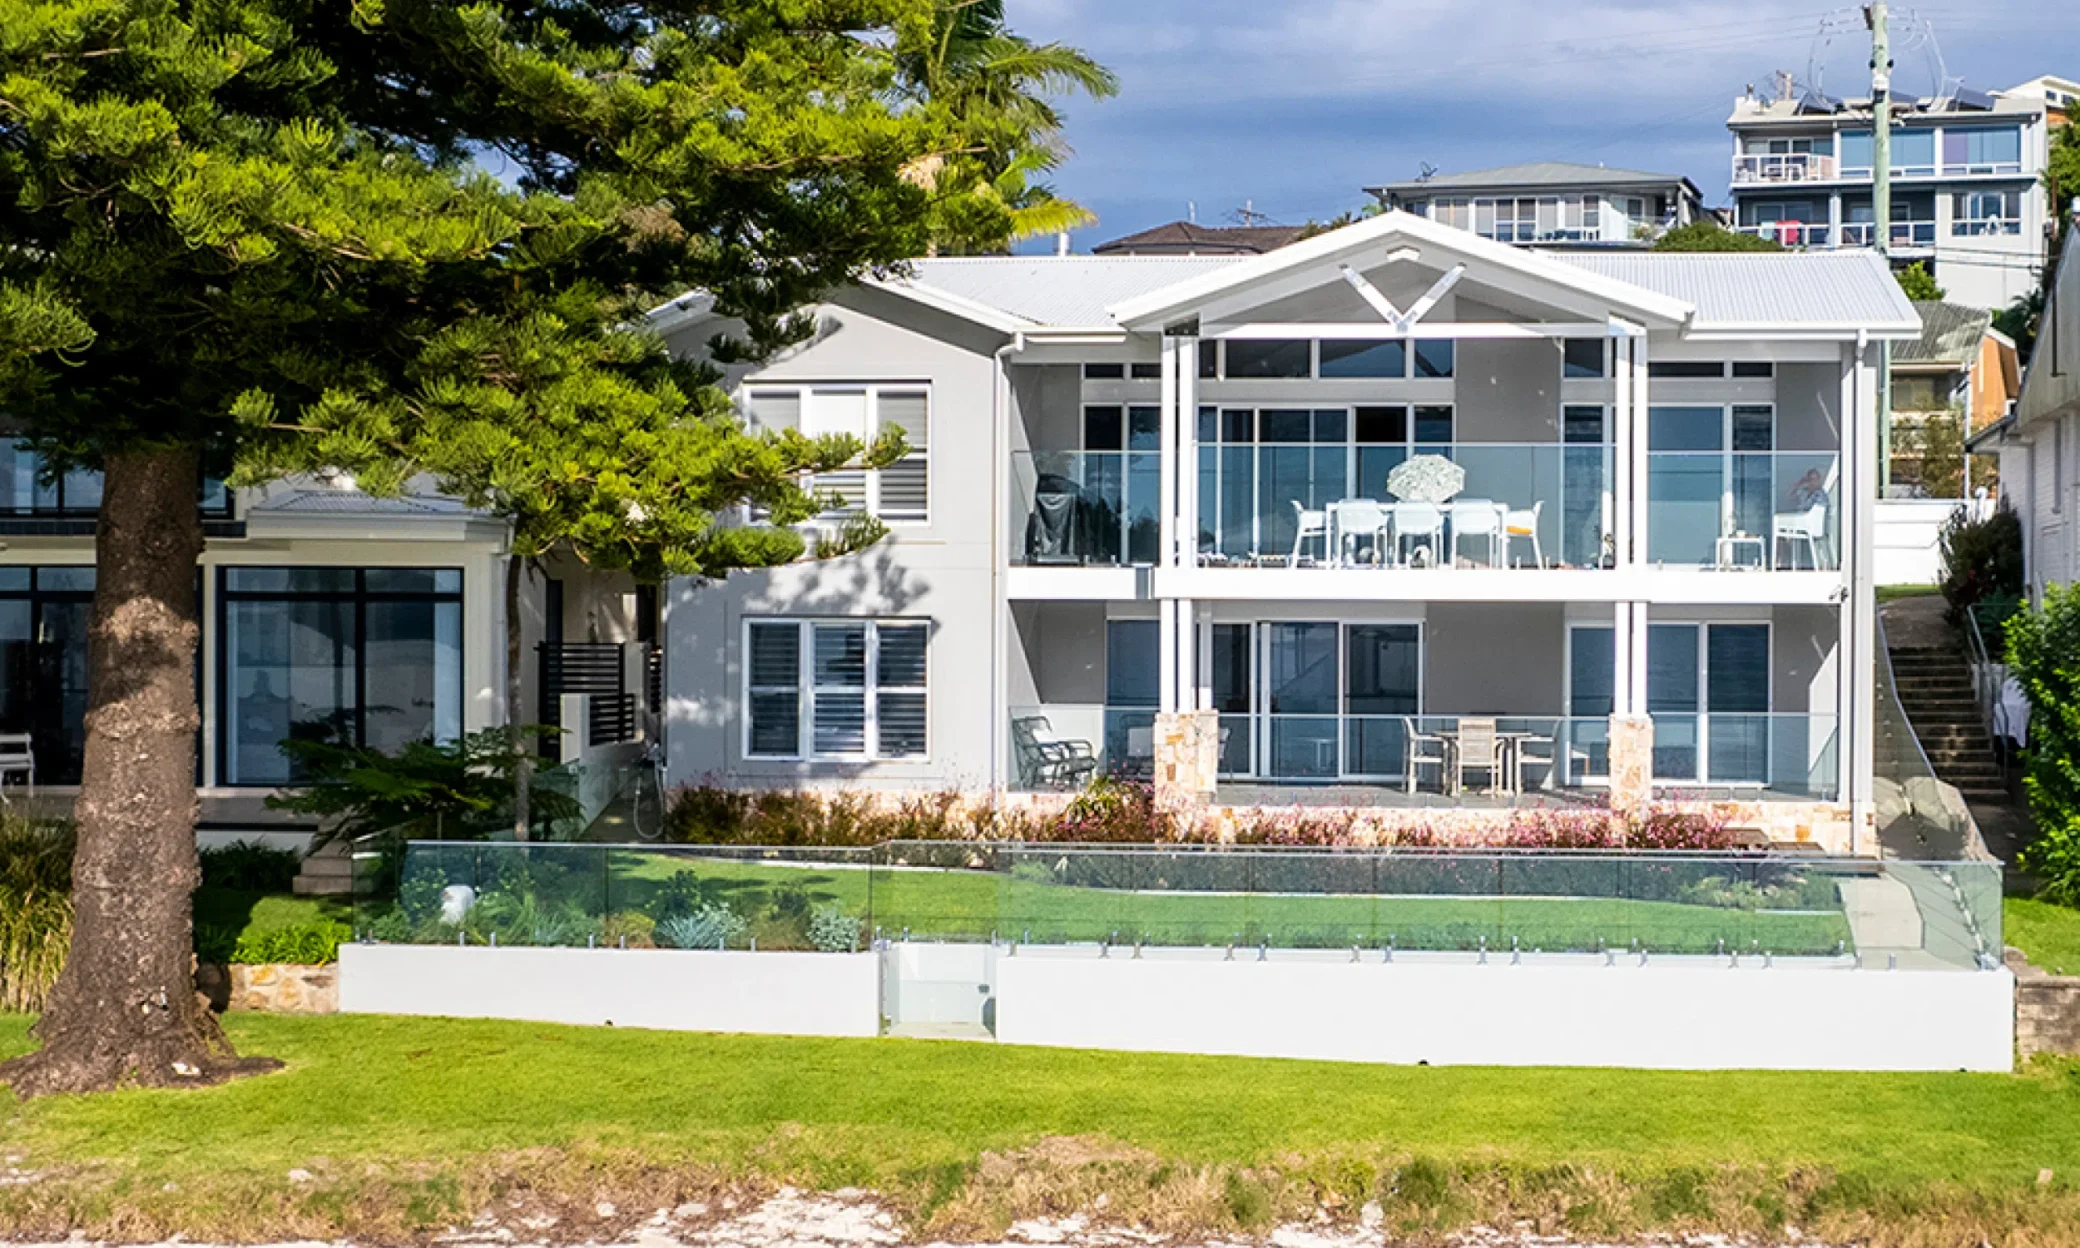 Modern two-story beachfront house in Port Stephens with large windows, a balcony, and a glass fence. There's a prominent pine tree to the left and grass in the foreground.